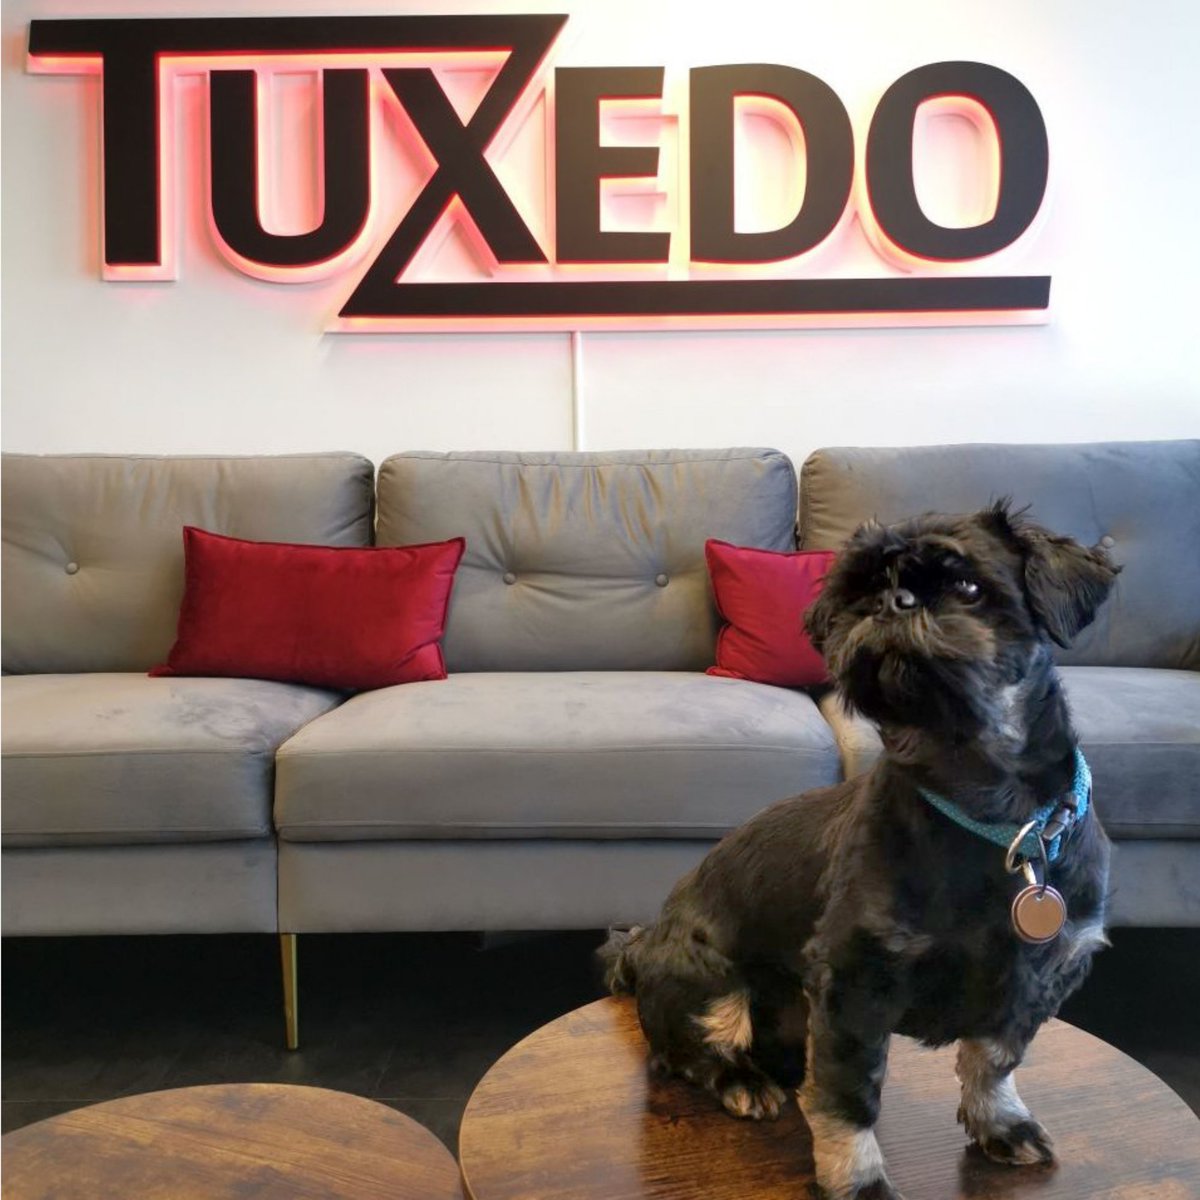 June 23 is worldwide office dog day. This is not a rarity for Alfred. He is already an integral part of the team & happily welcomed into the office several times a week. Which 4-legged friends are allowed in the office with you? Post pictures - we're curious! #takeyourdogtowork